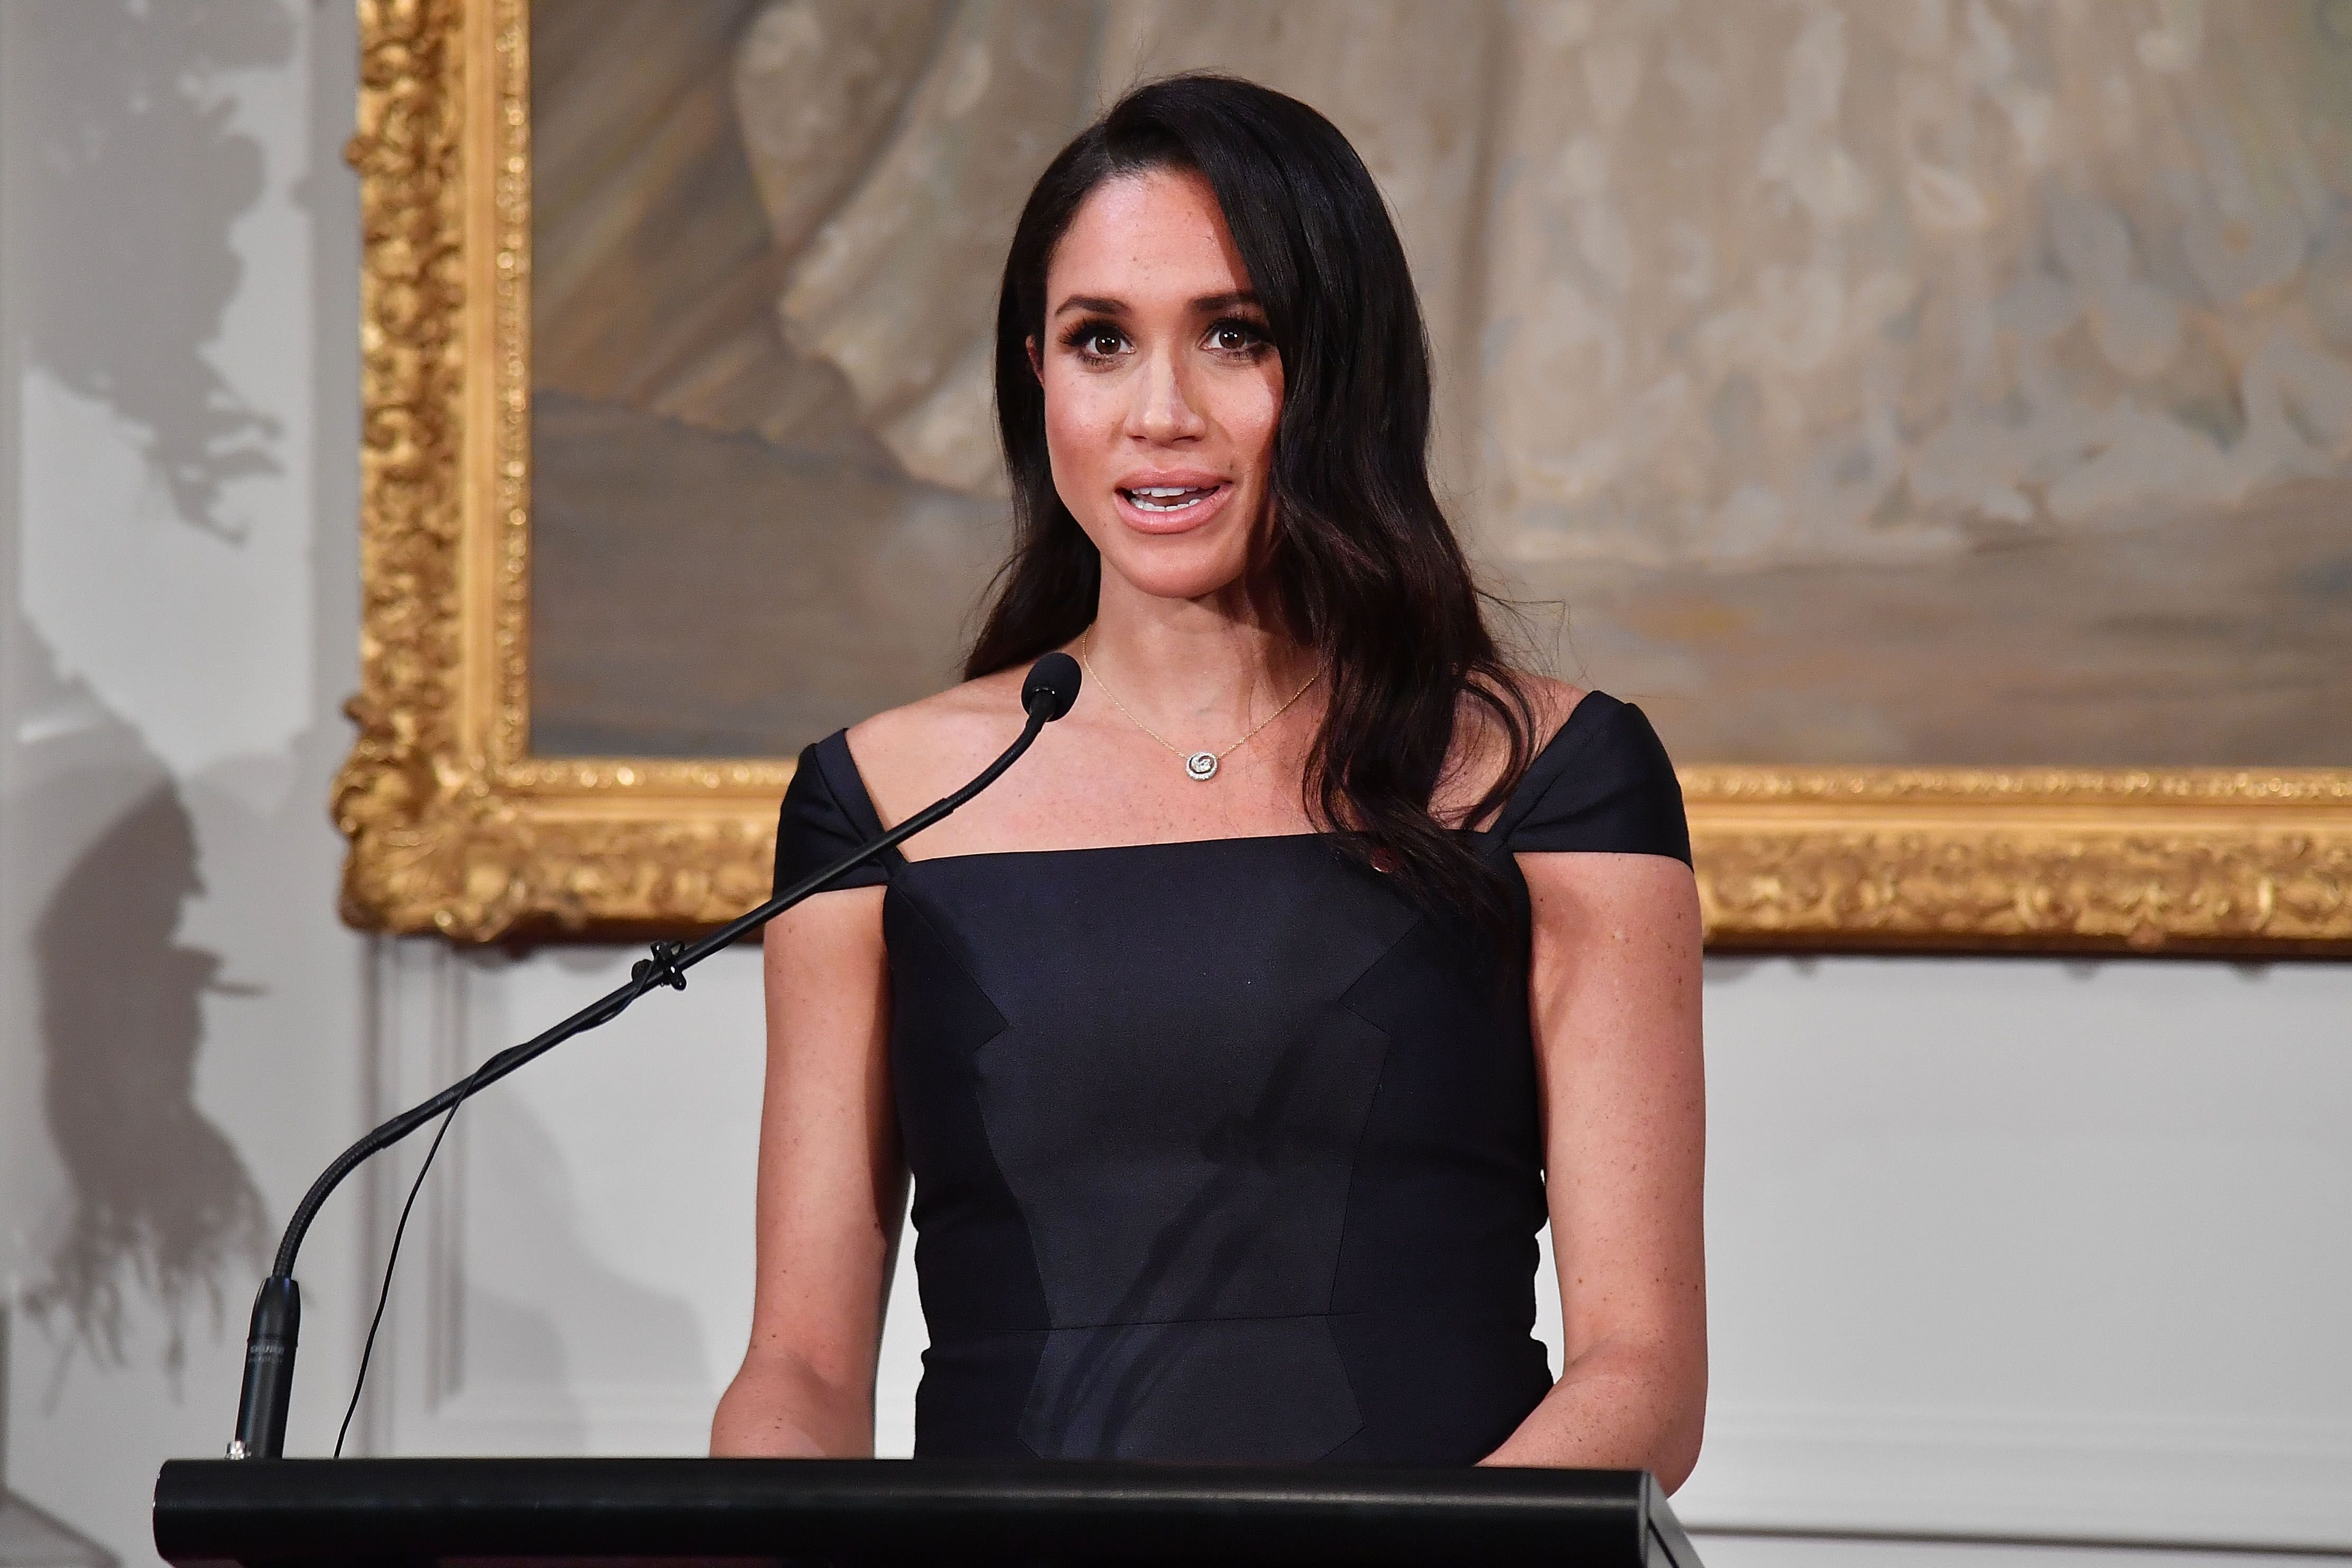 Meghan, Duchess of Sussex speaks to invited guests during a reception at Government House in Wellington, New Zealand | Photo: Getty Images